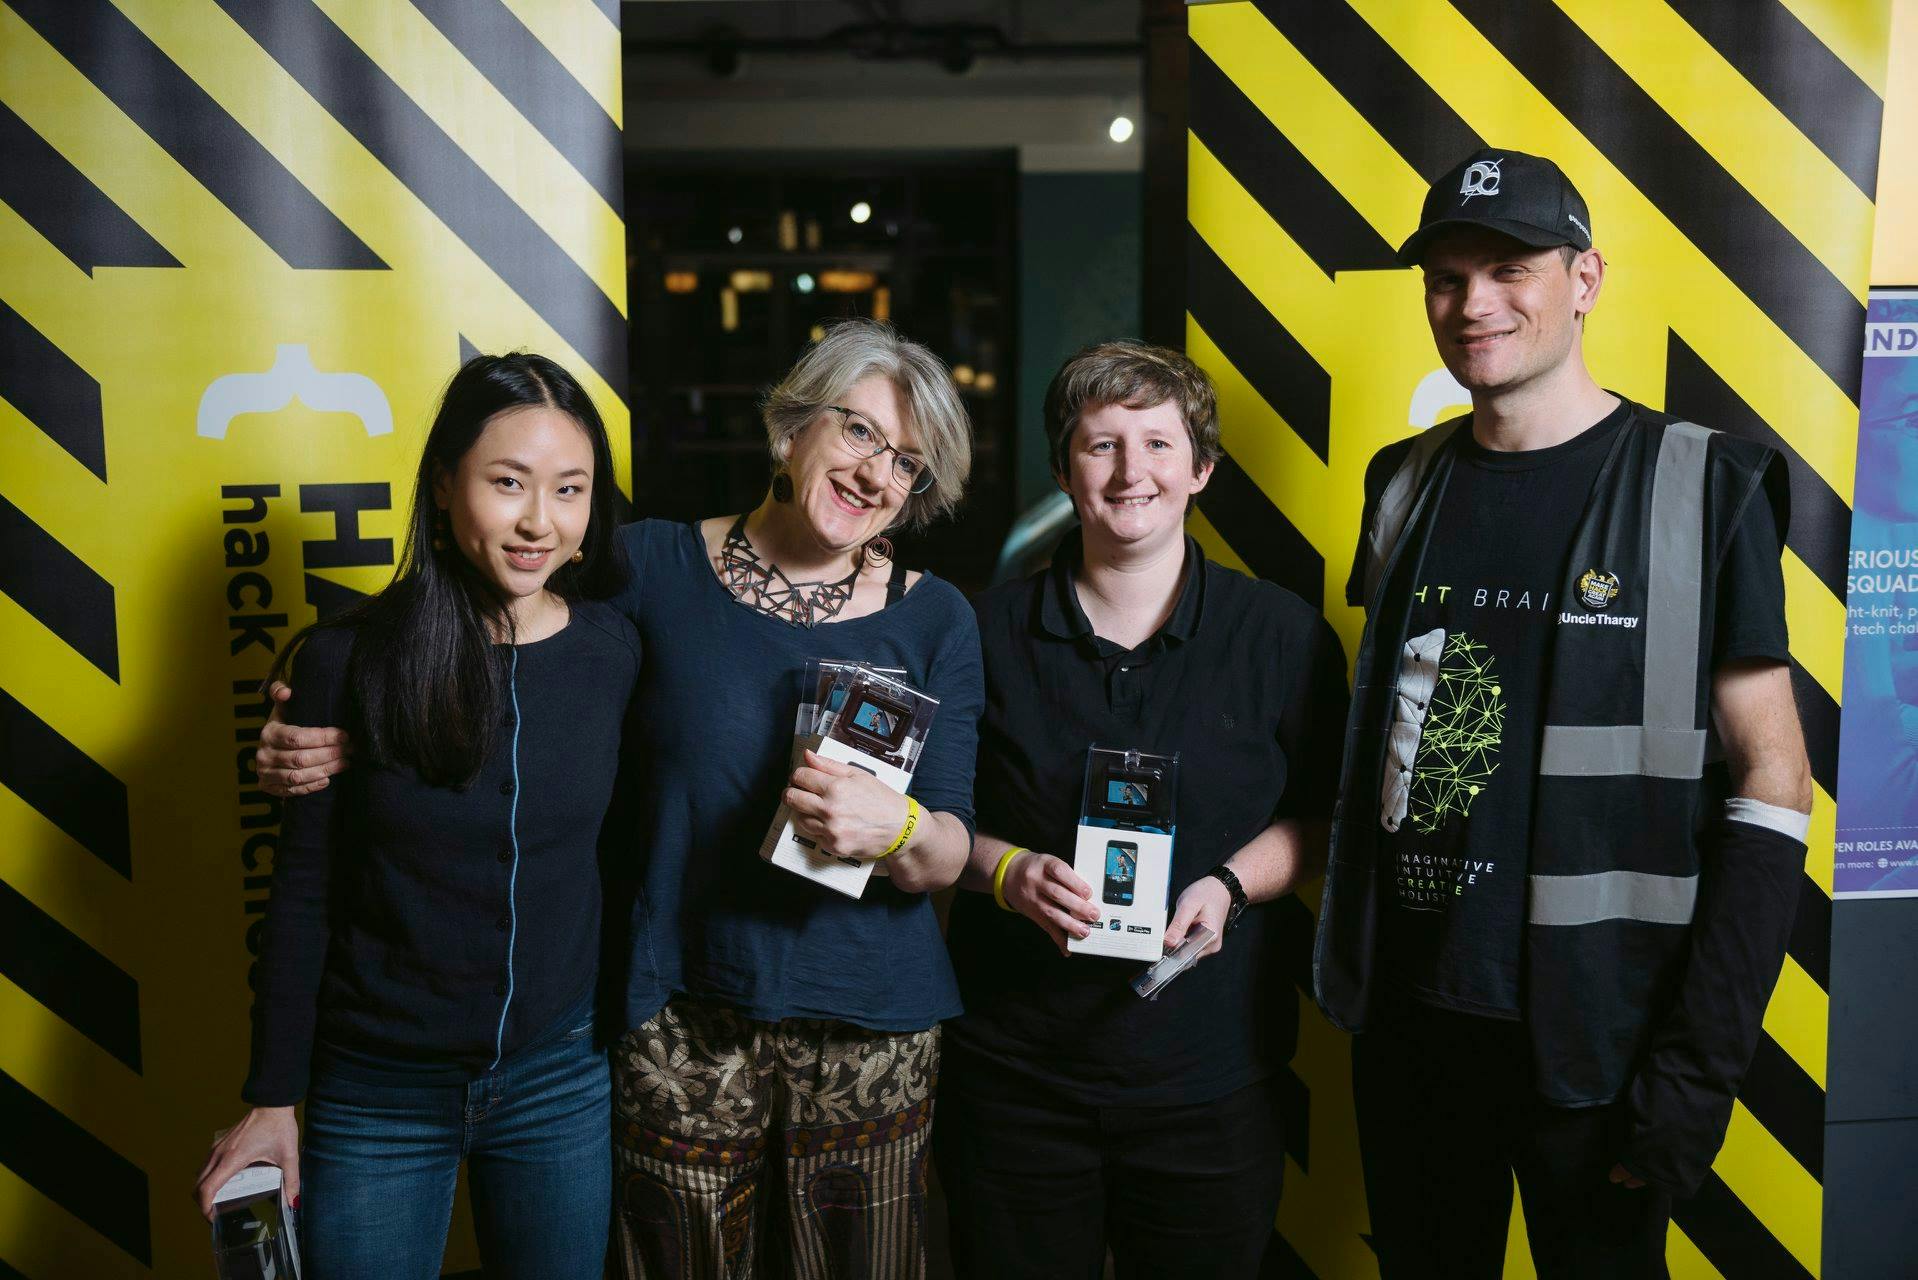 A photo of our team (minus Sal) accepting our awards at Hack Manchester 2018